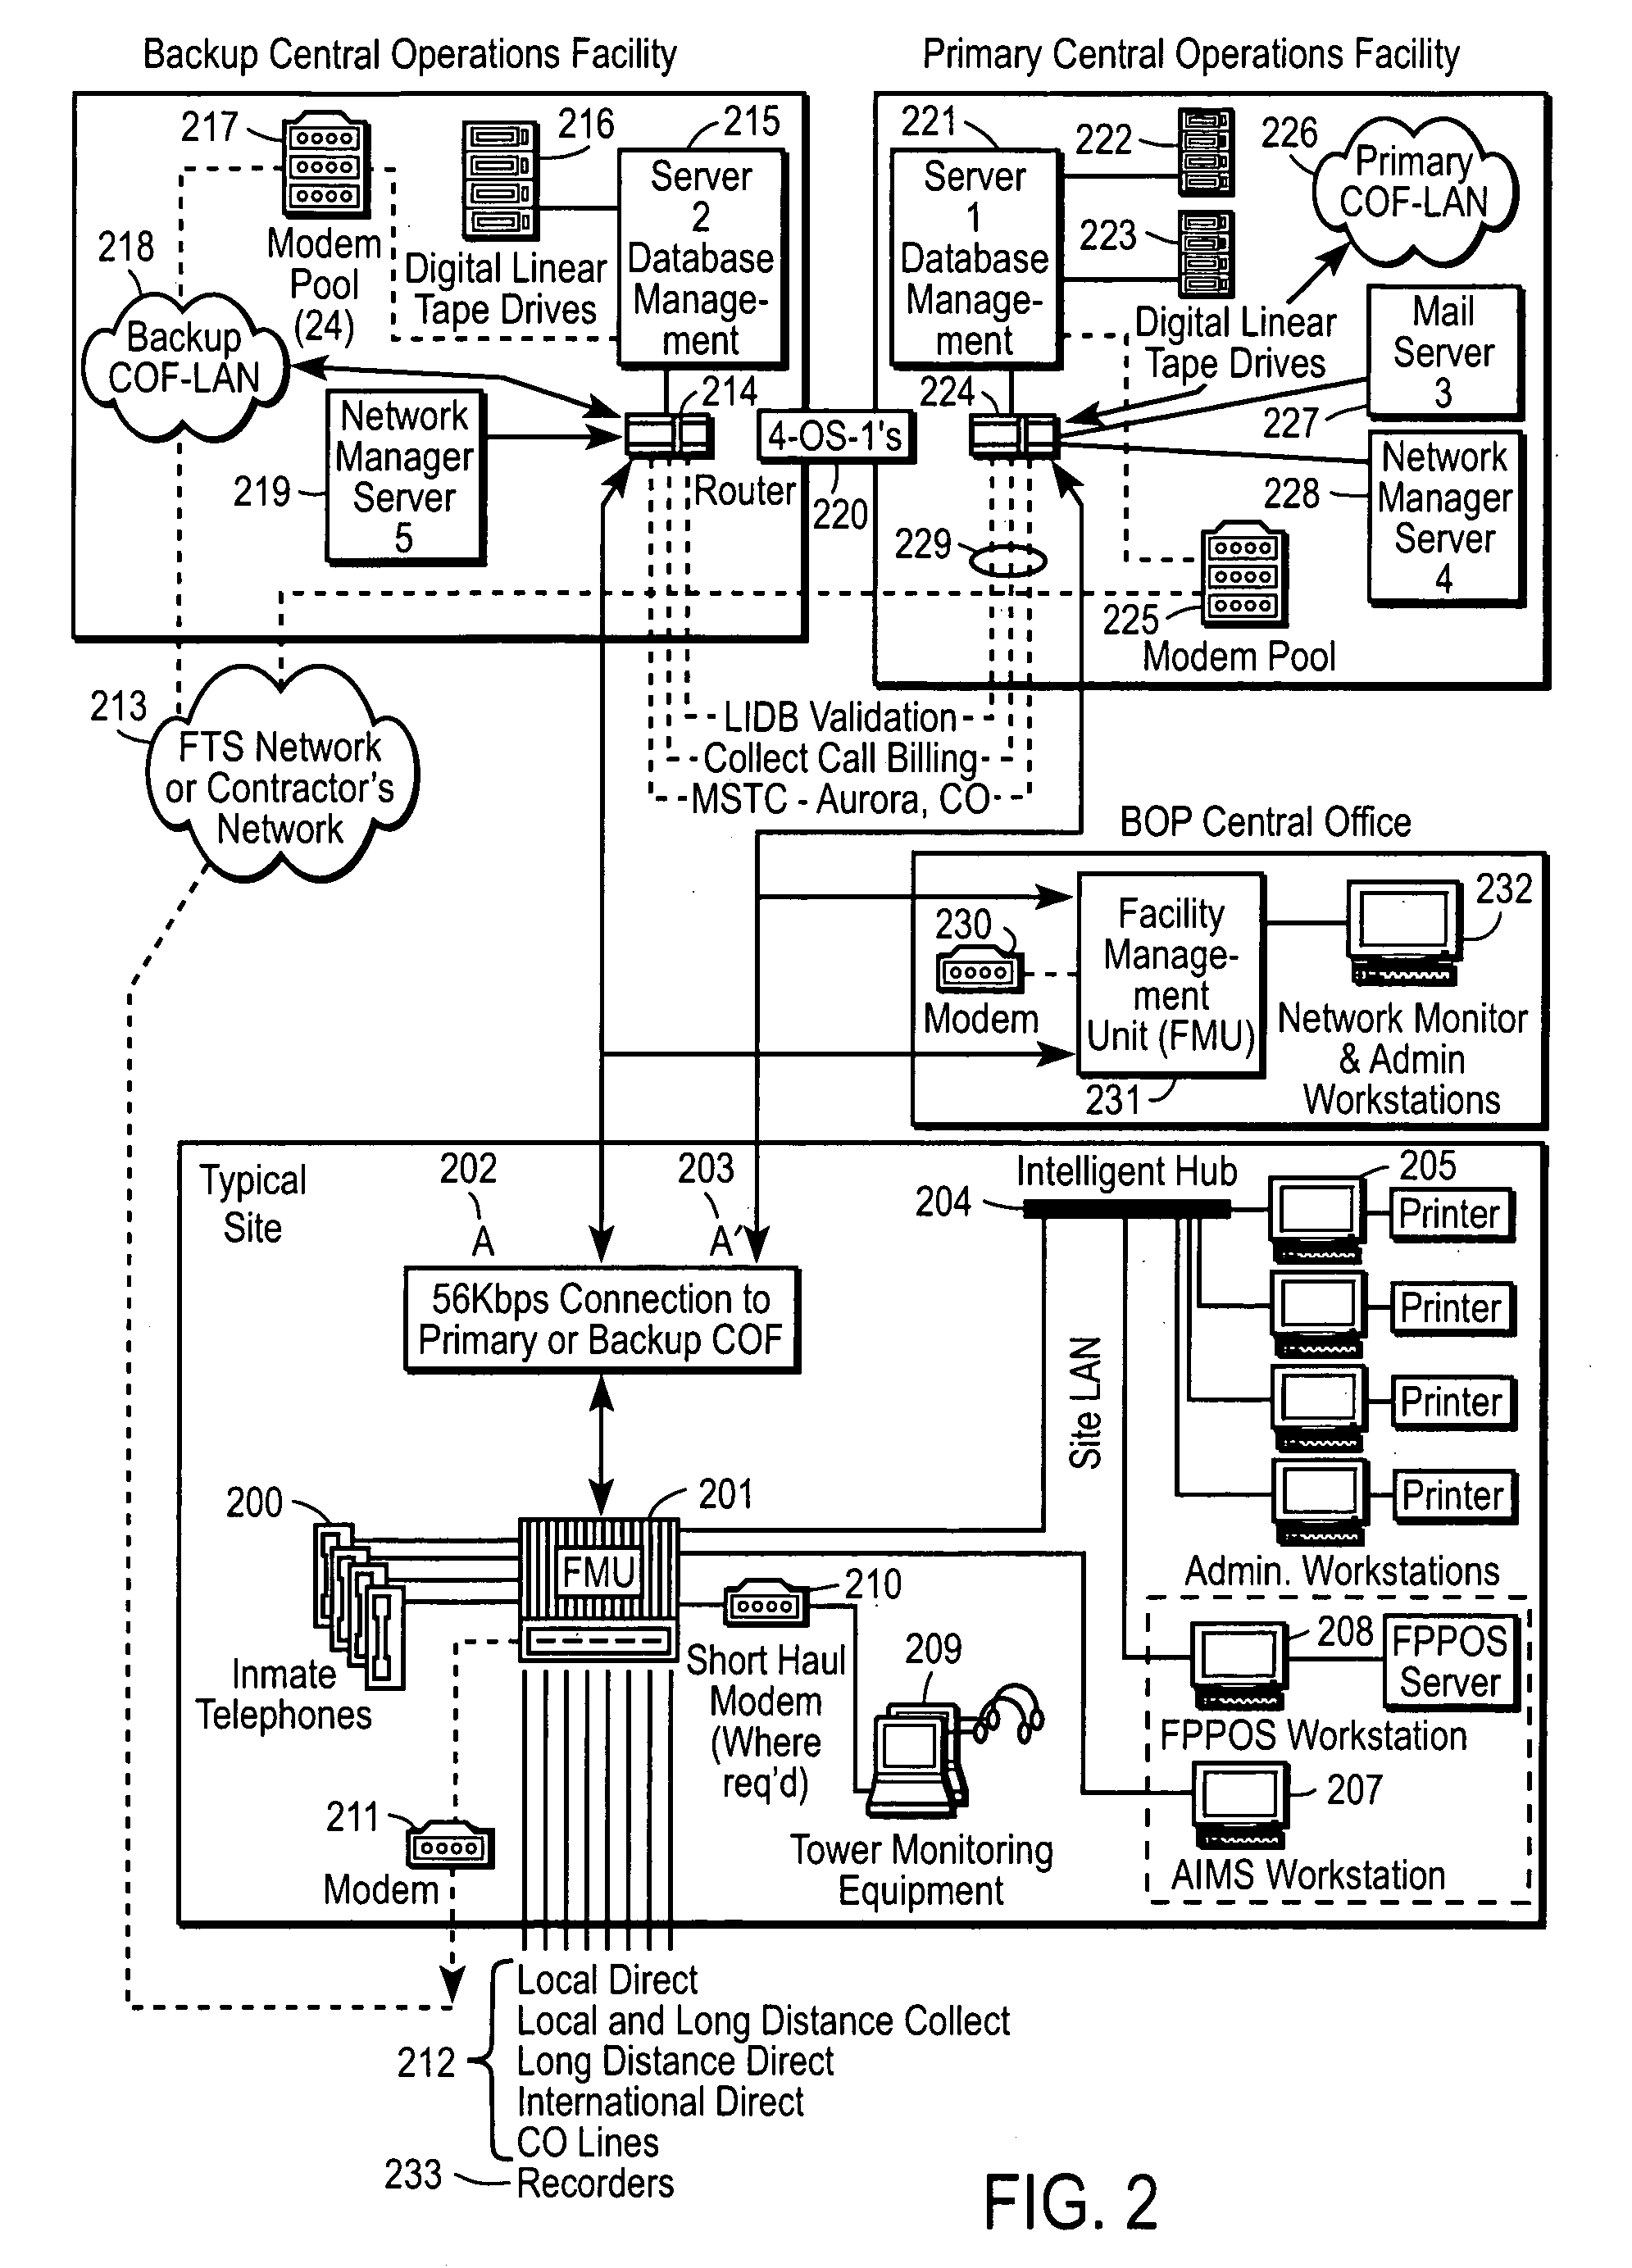 Computer-based method and apparatus for controlling, monitoring, recording and reporting telephone access